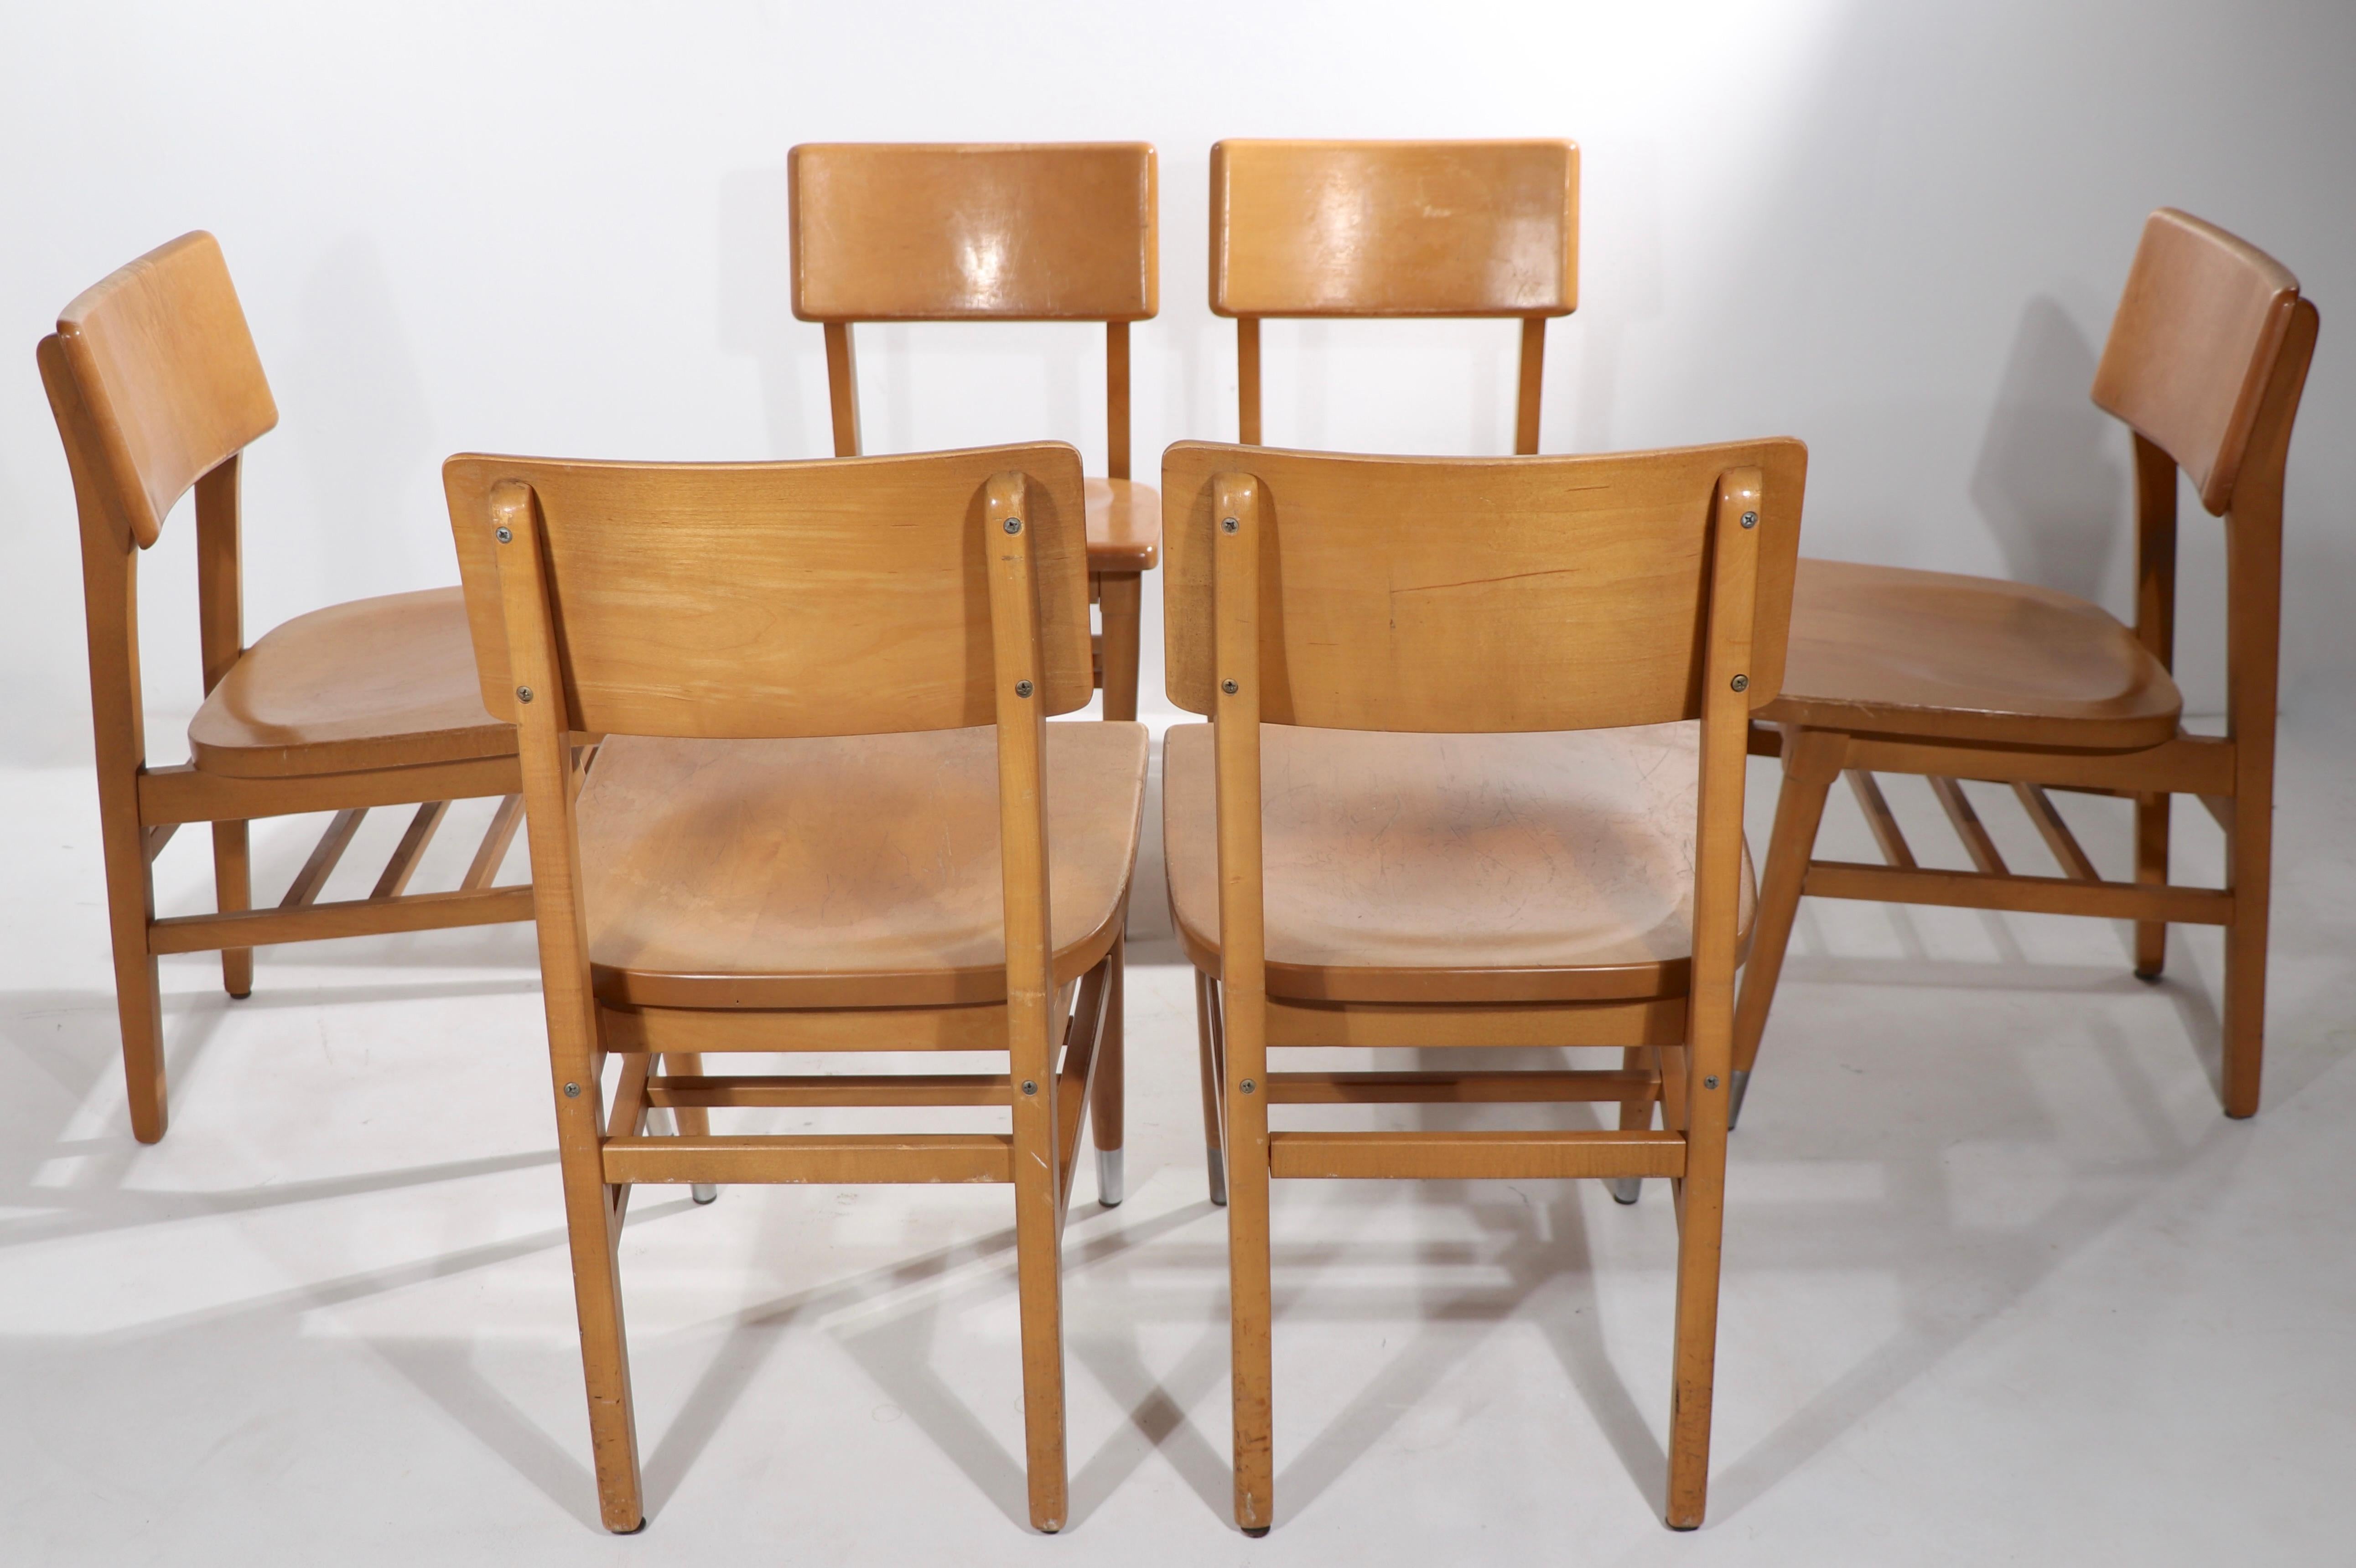 Large Group 50 Pc. Mid Century Cafe Dining Chairs After McCobb 2